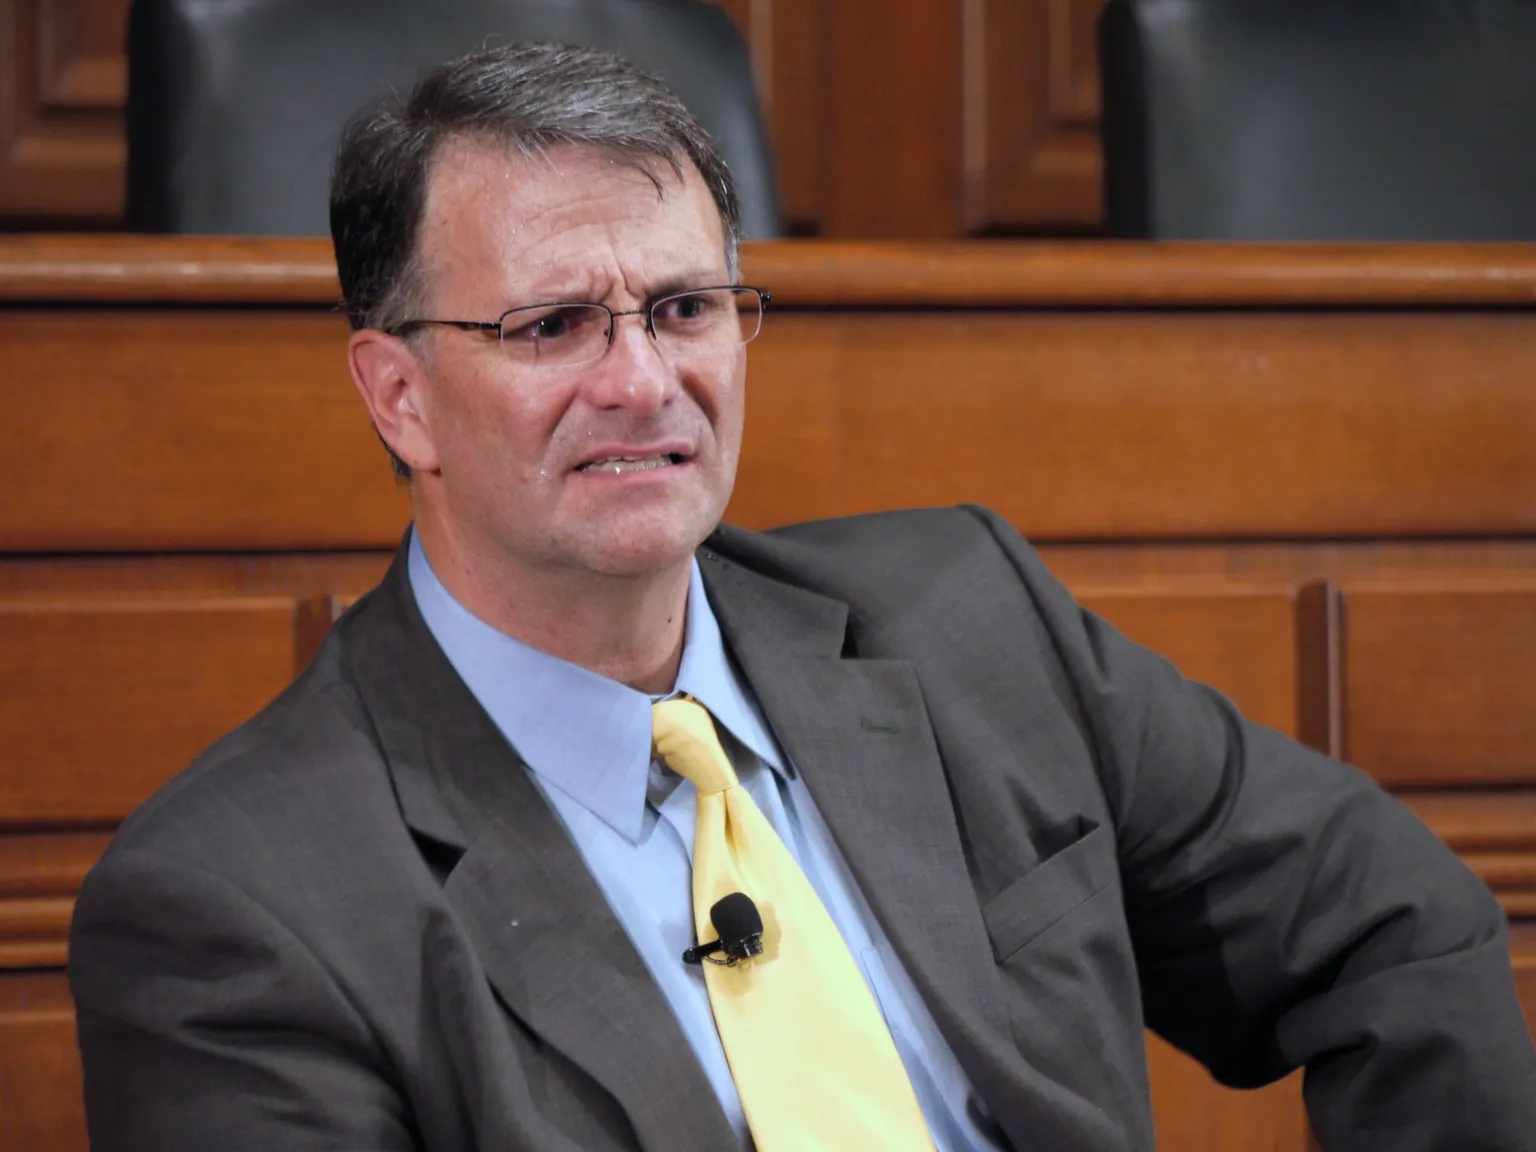 Jack Abramoff was once considered a powerful lobbyist. (Image: Wikipedia)